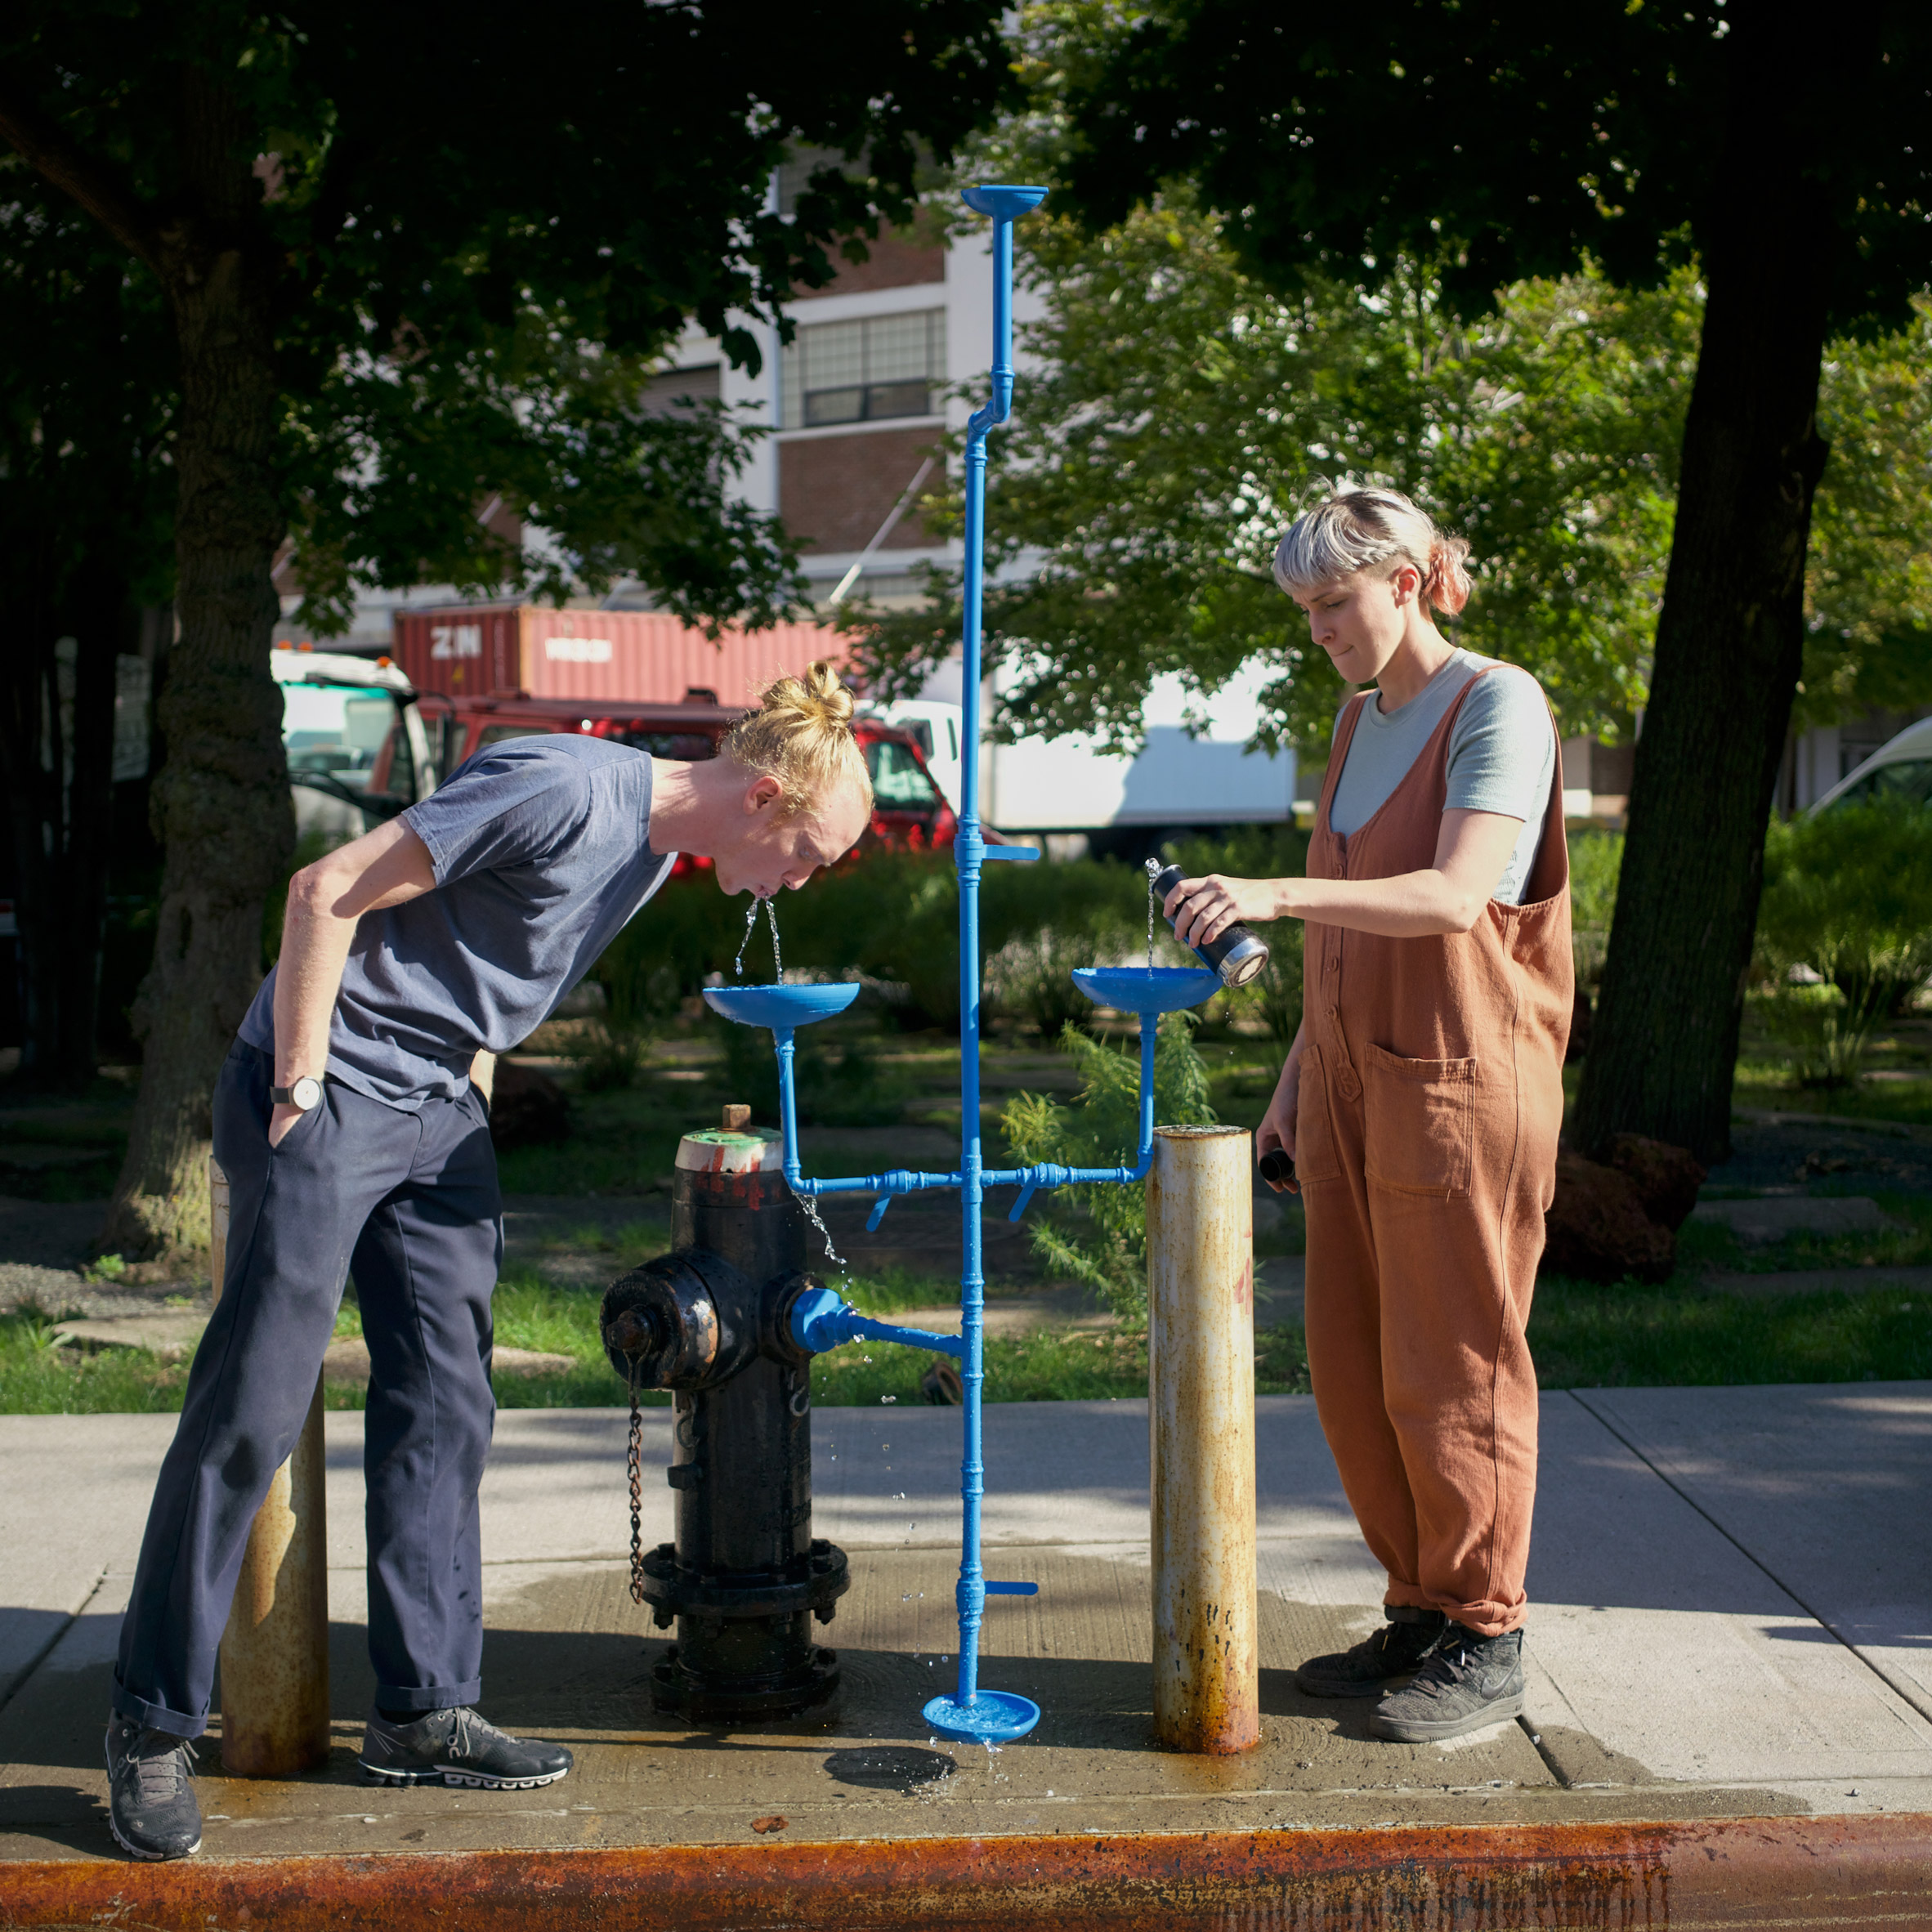 New Public Hydrant by Agency-Agency and Chris Woebken